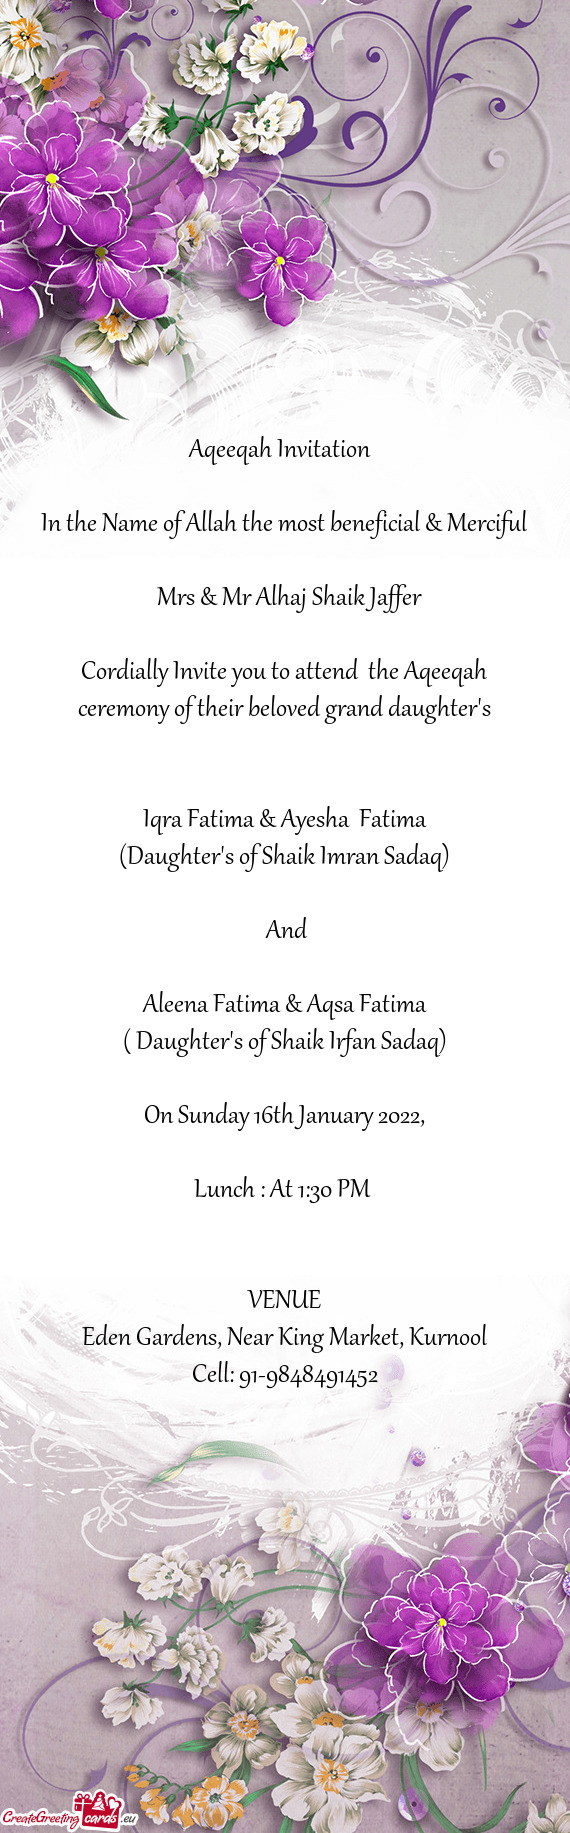 Cordially Invite you to attend the Aqeeqah ceremony of their beloved grand daughter